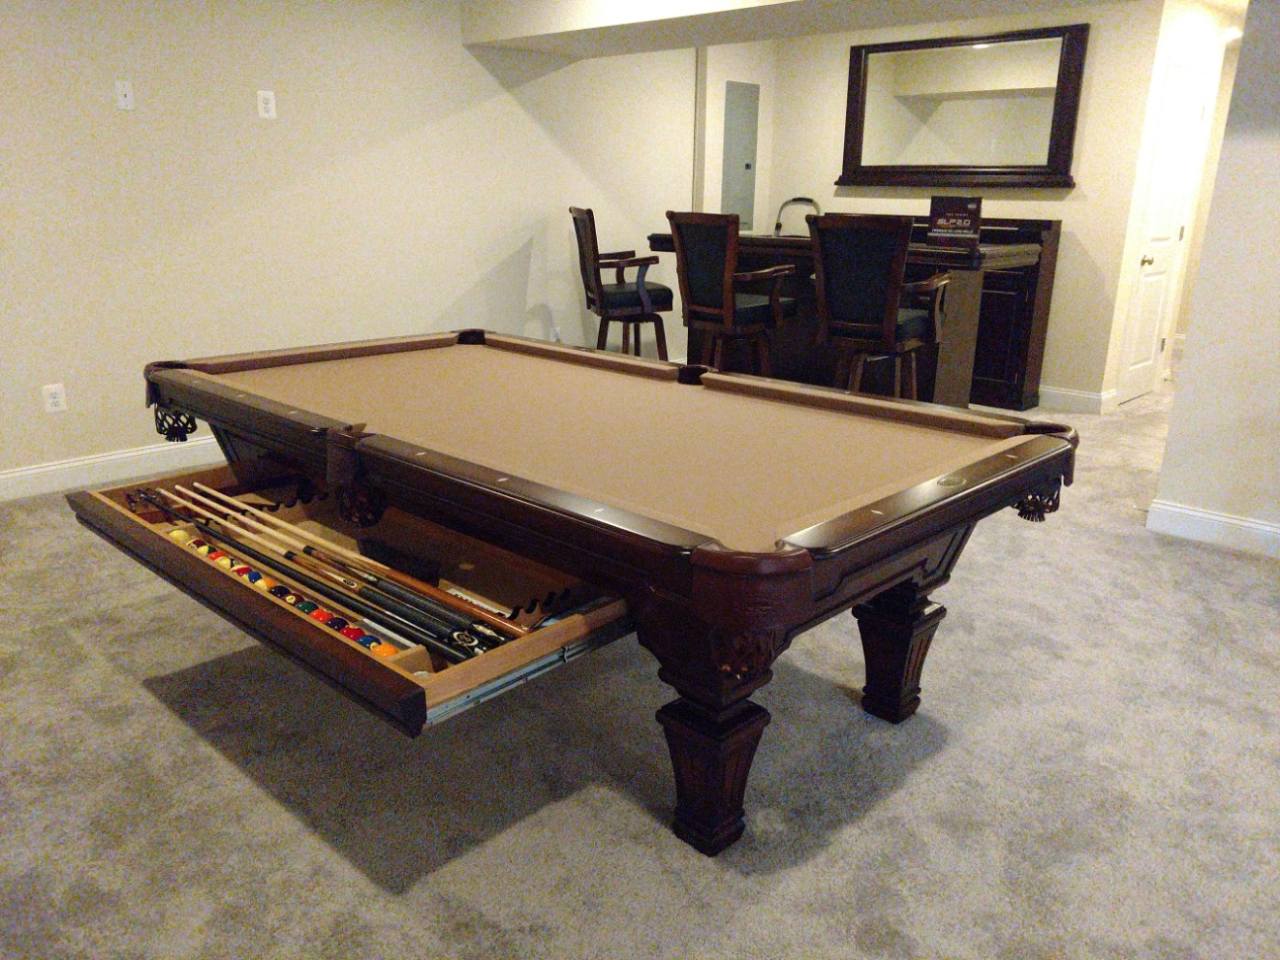 Olhausen Hampton Pool Table installed in Bowie Maryland